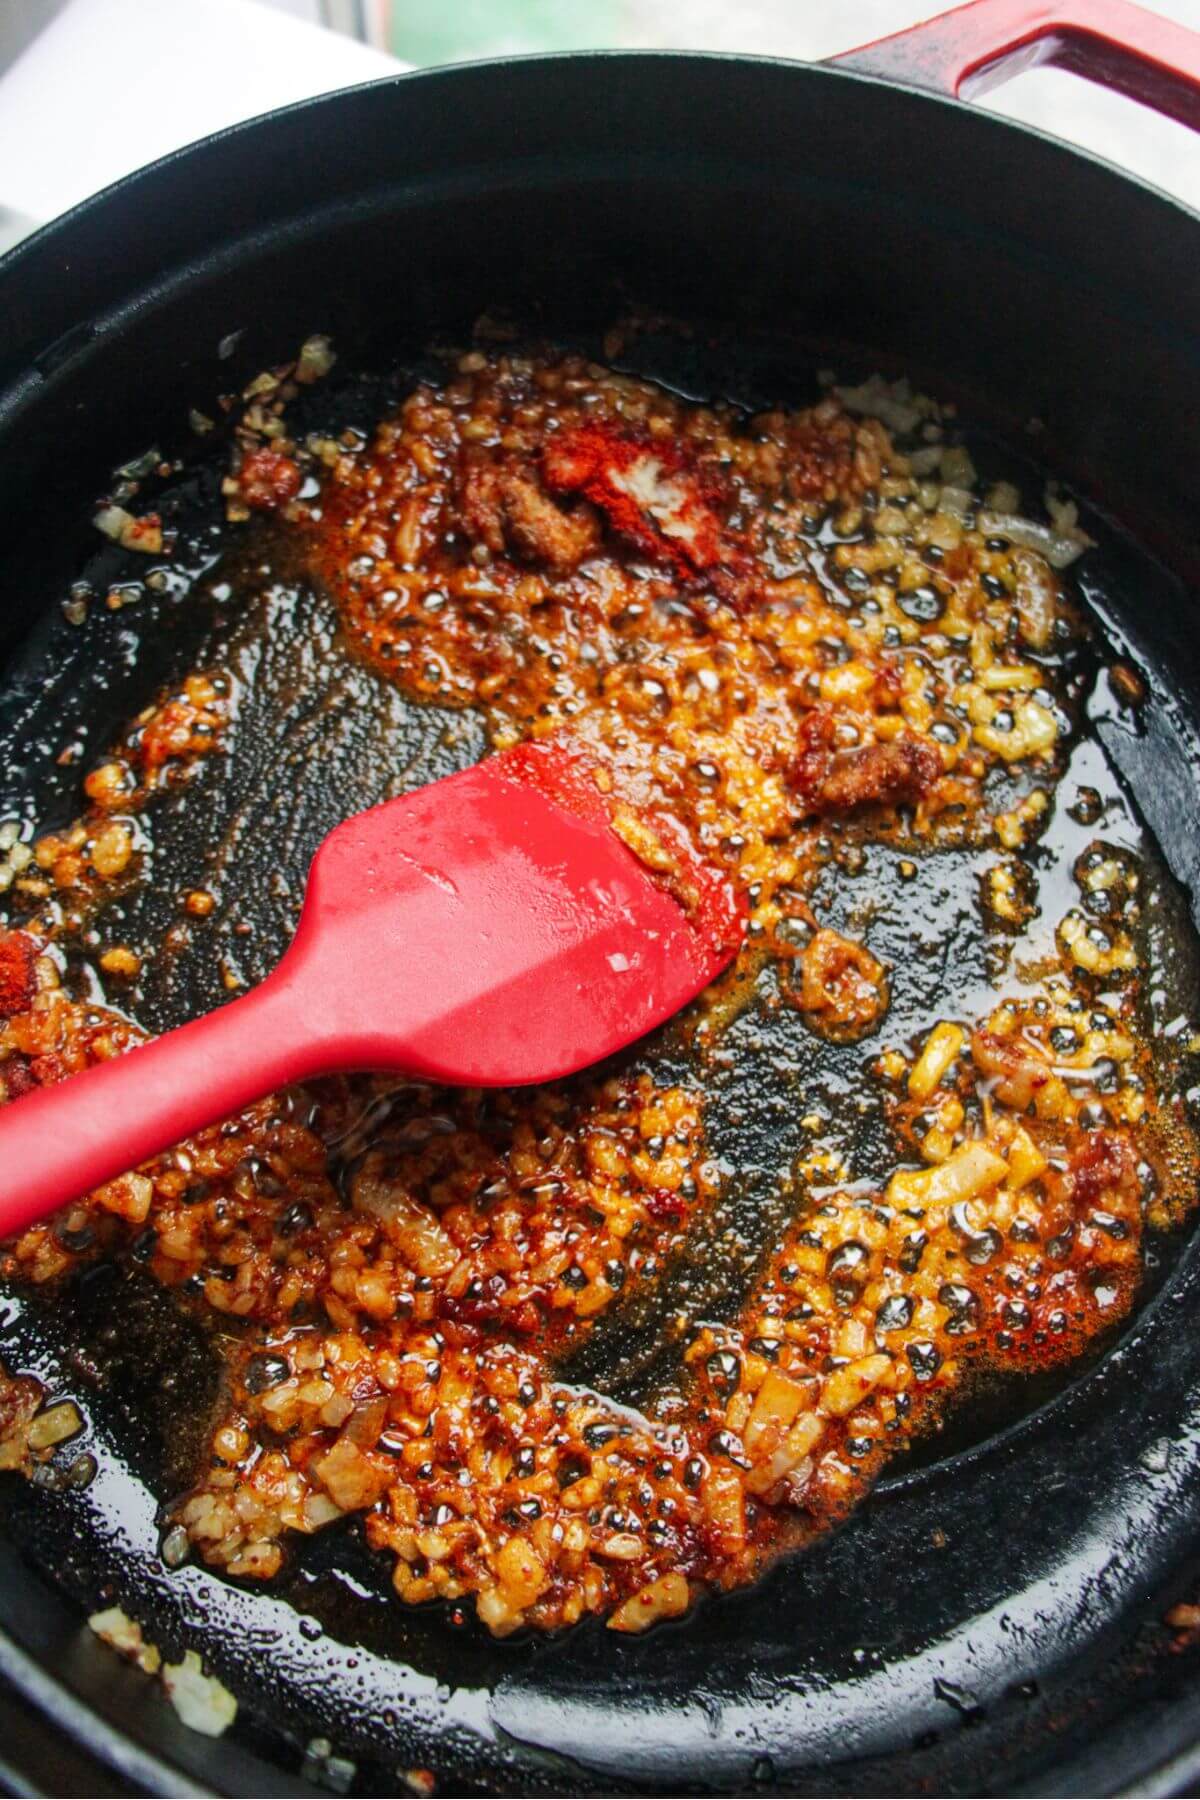 Red spatula stirring spices through diced onion and garlic in a black pan.